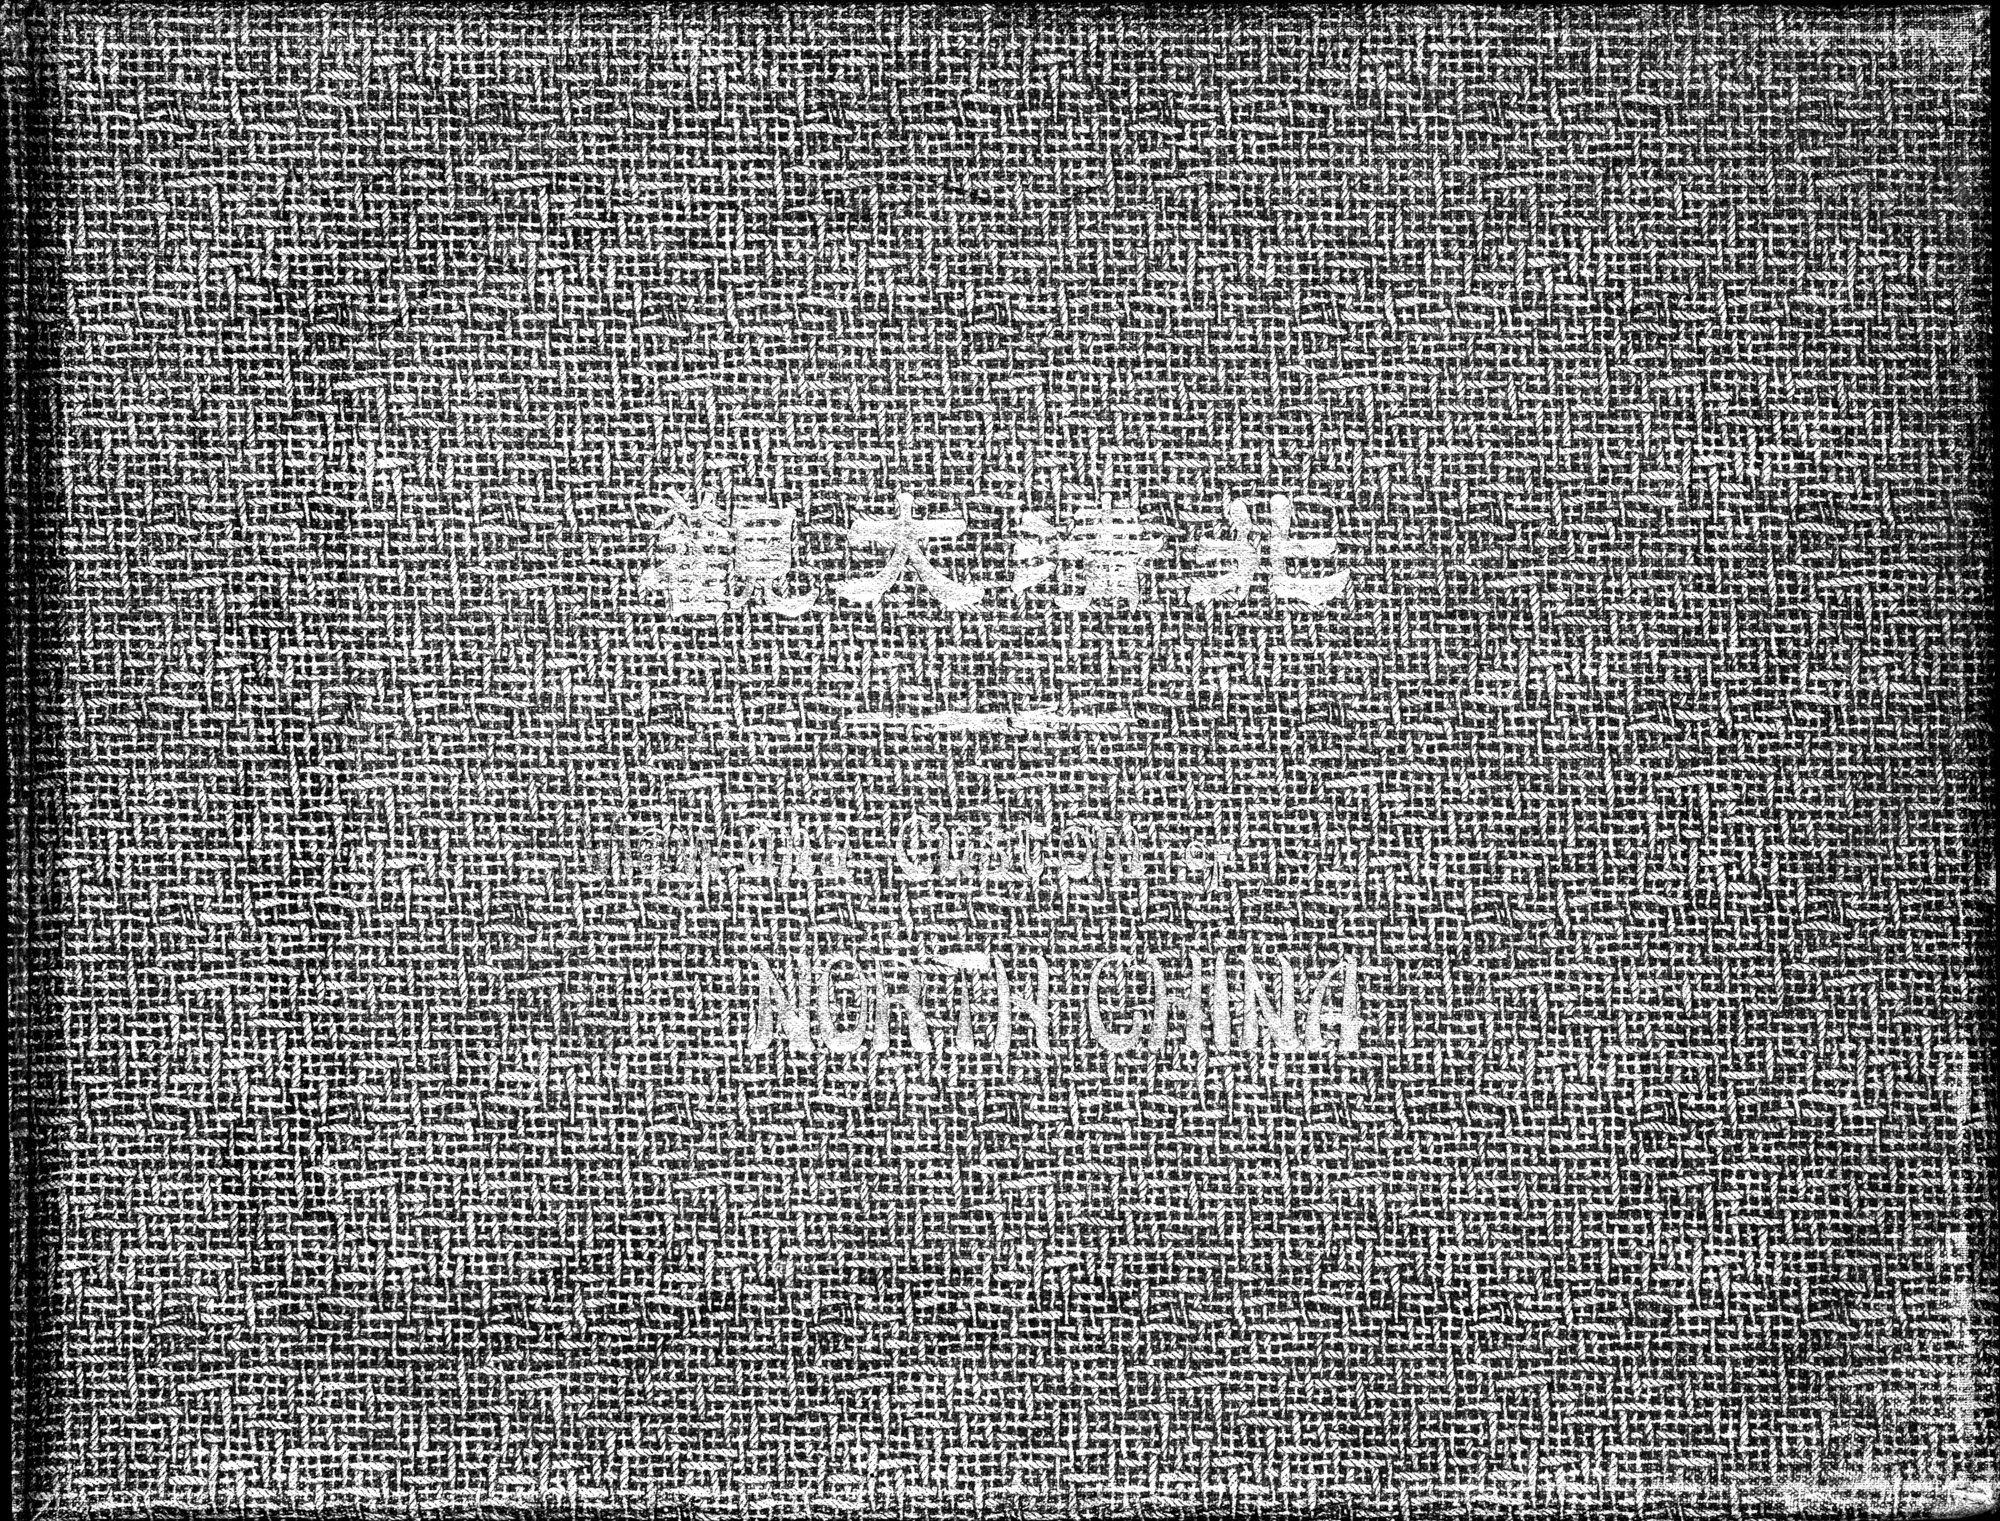 Views and Custom of North China : vol.1 / Page 1 (Grayscale High Resolution Image)